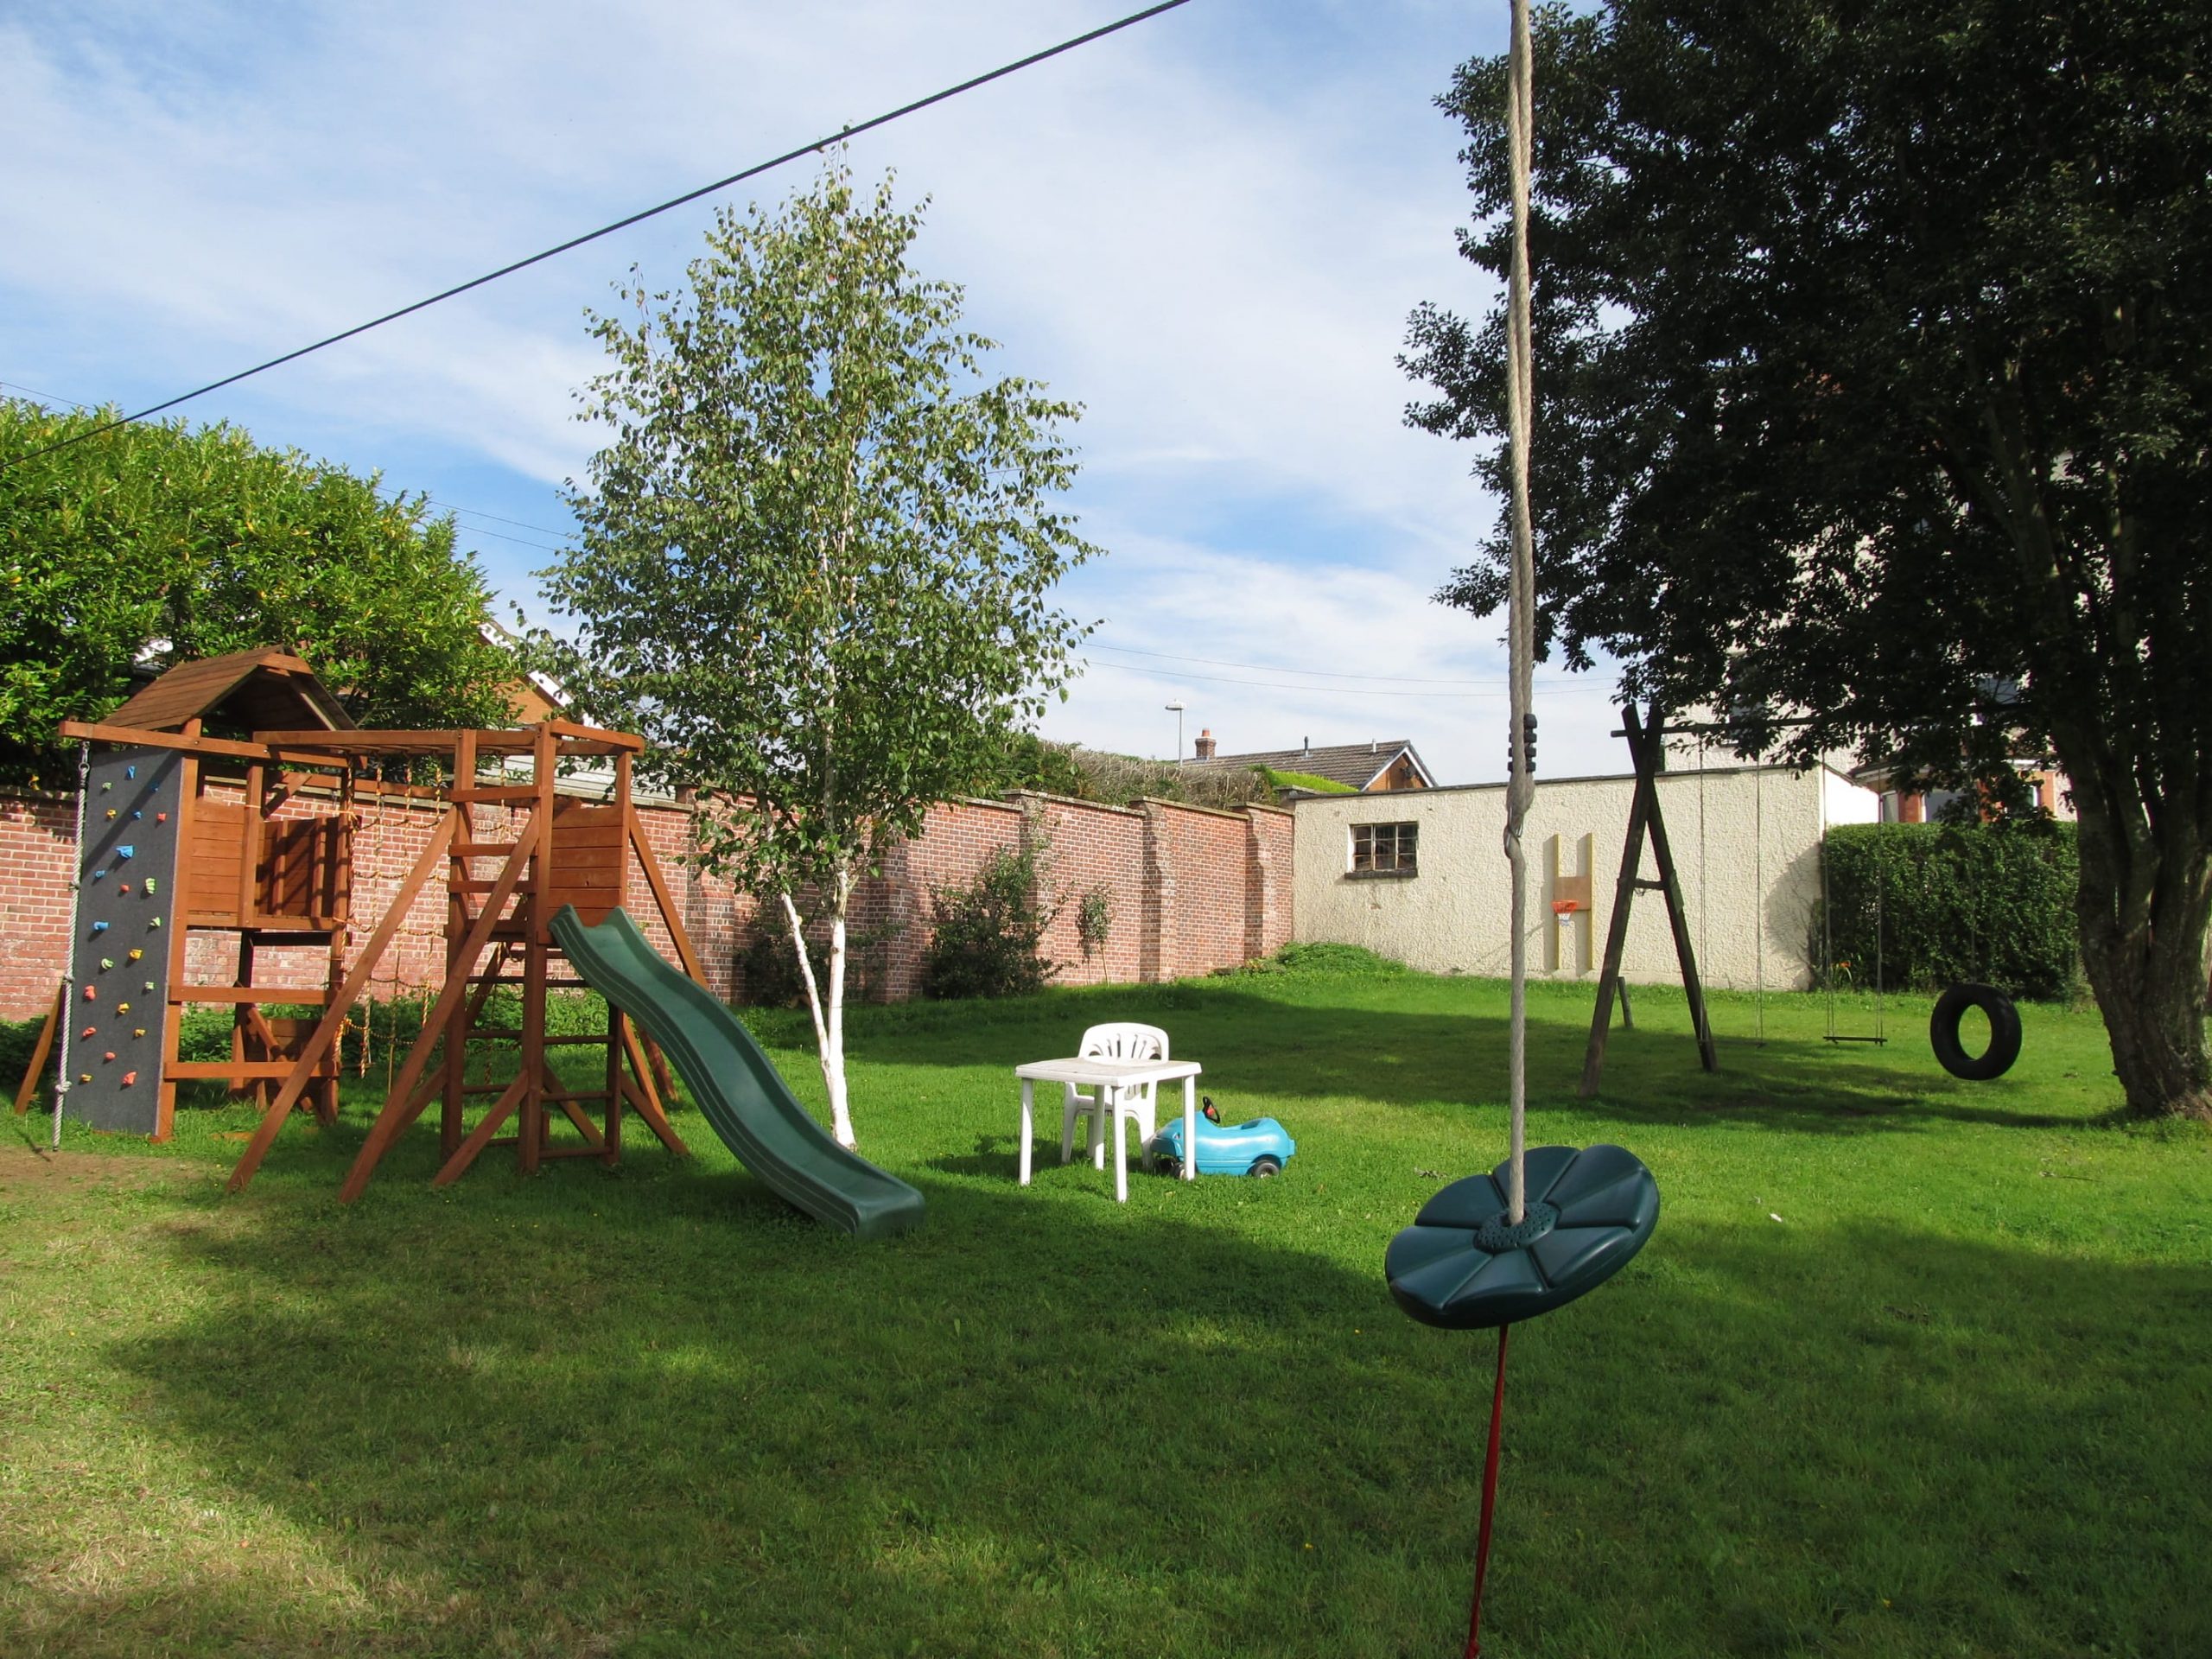 Play area for children and pets